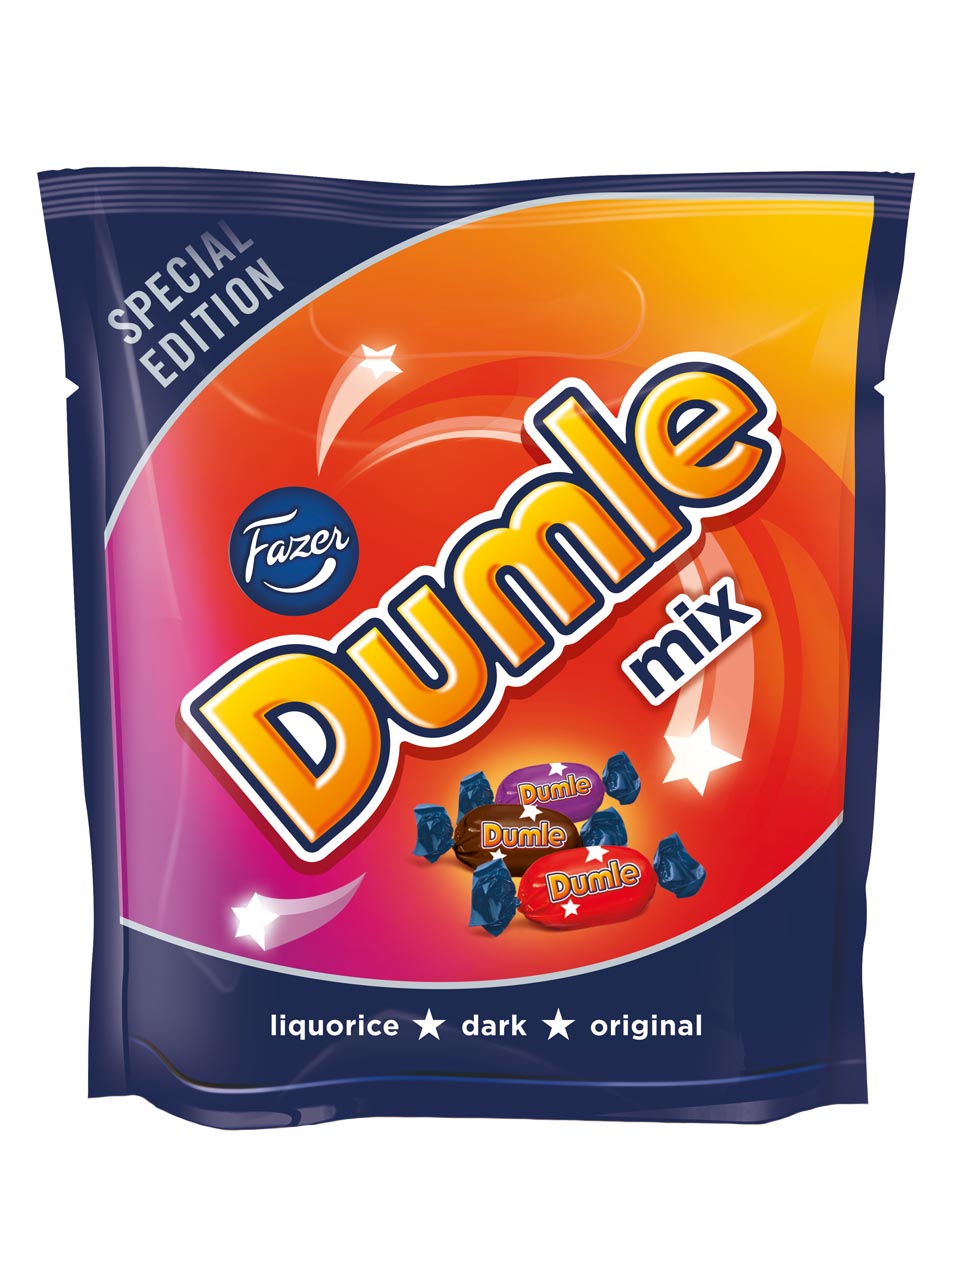 Mix Standing Bag with 3 different kinds of Dumle: original, dark, and liquorice null - onesize - 1